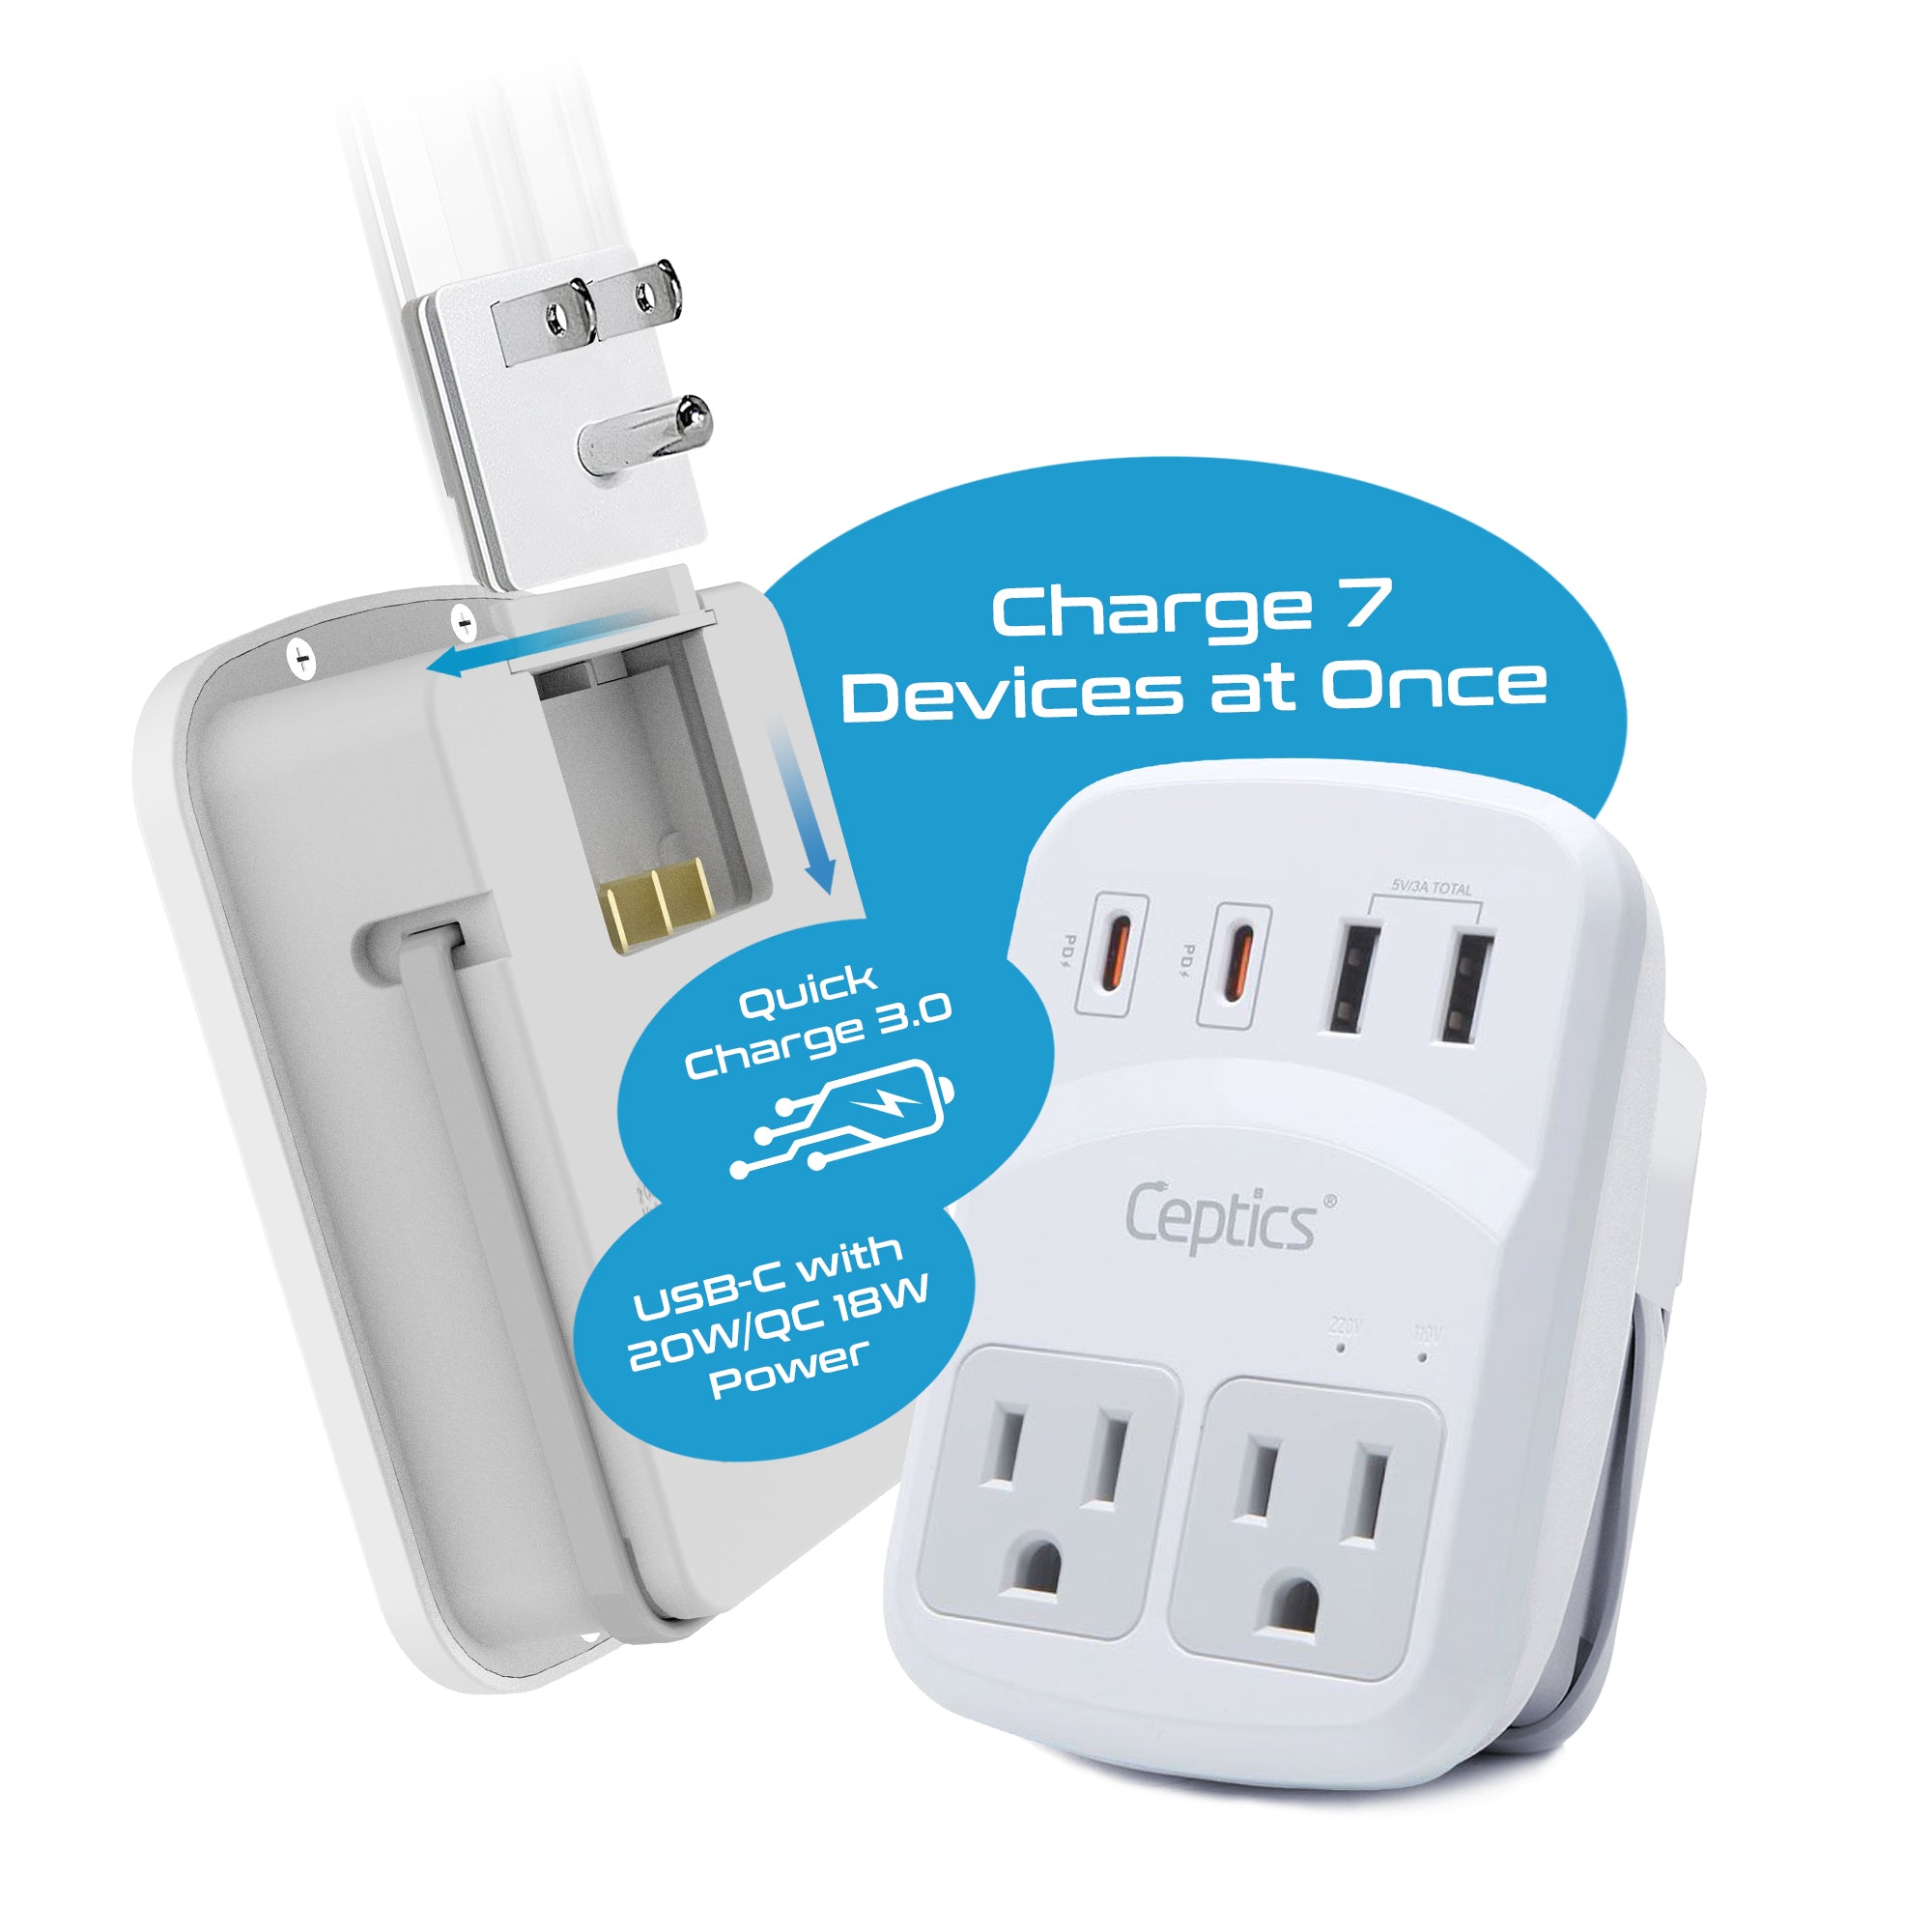 Ceptics World Travel Adapter Kit 2 USB-A USB-C US Outlets 20w/qc 18W Power Delivery Surge Protection SWadAPt Compatible for Europe UK China Australia